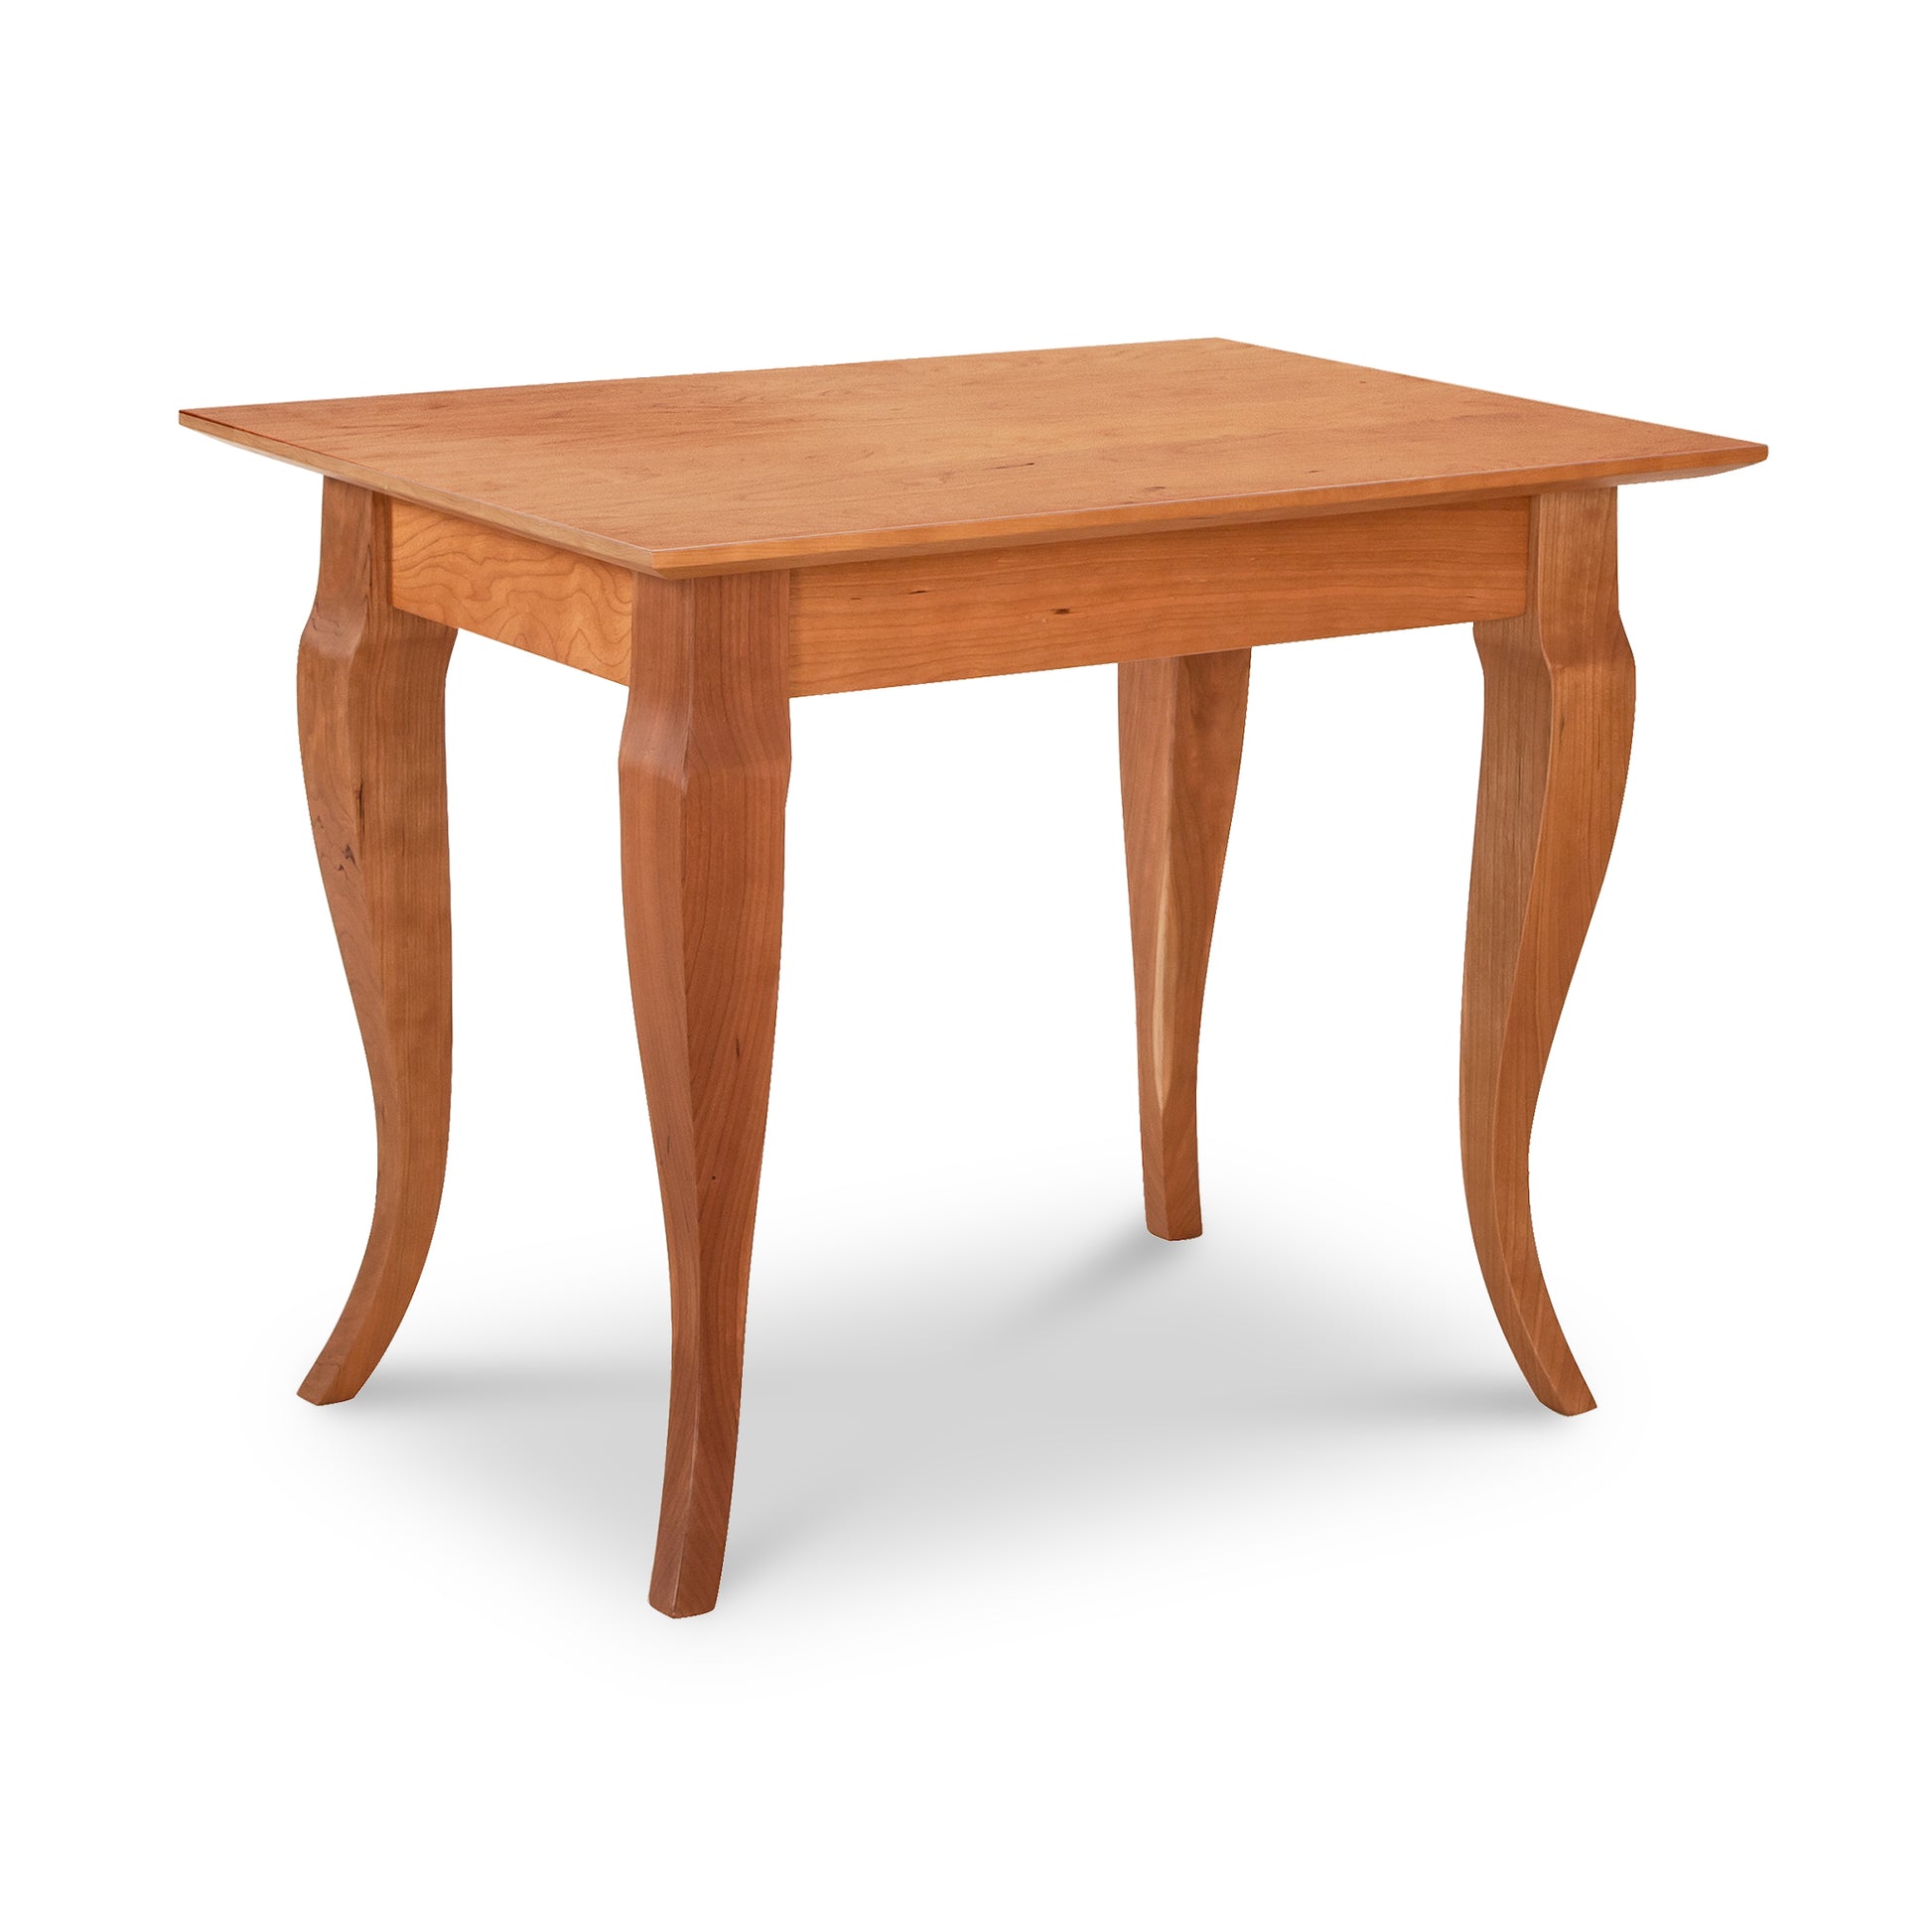 A luxury Lyndon Furniture French Country end table with a solid wood top and legs.